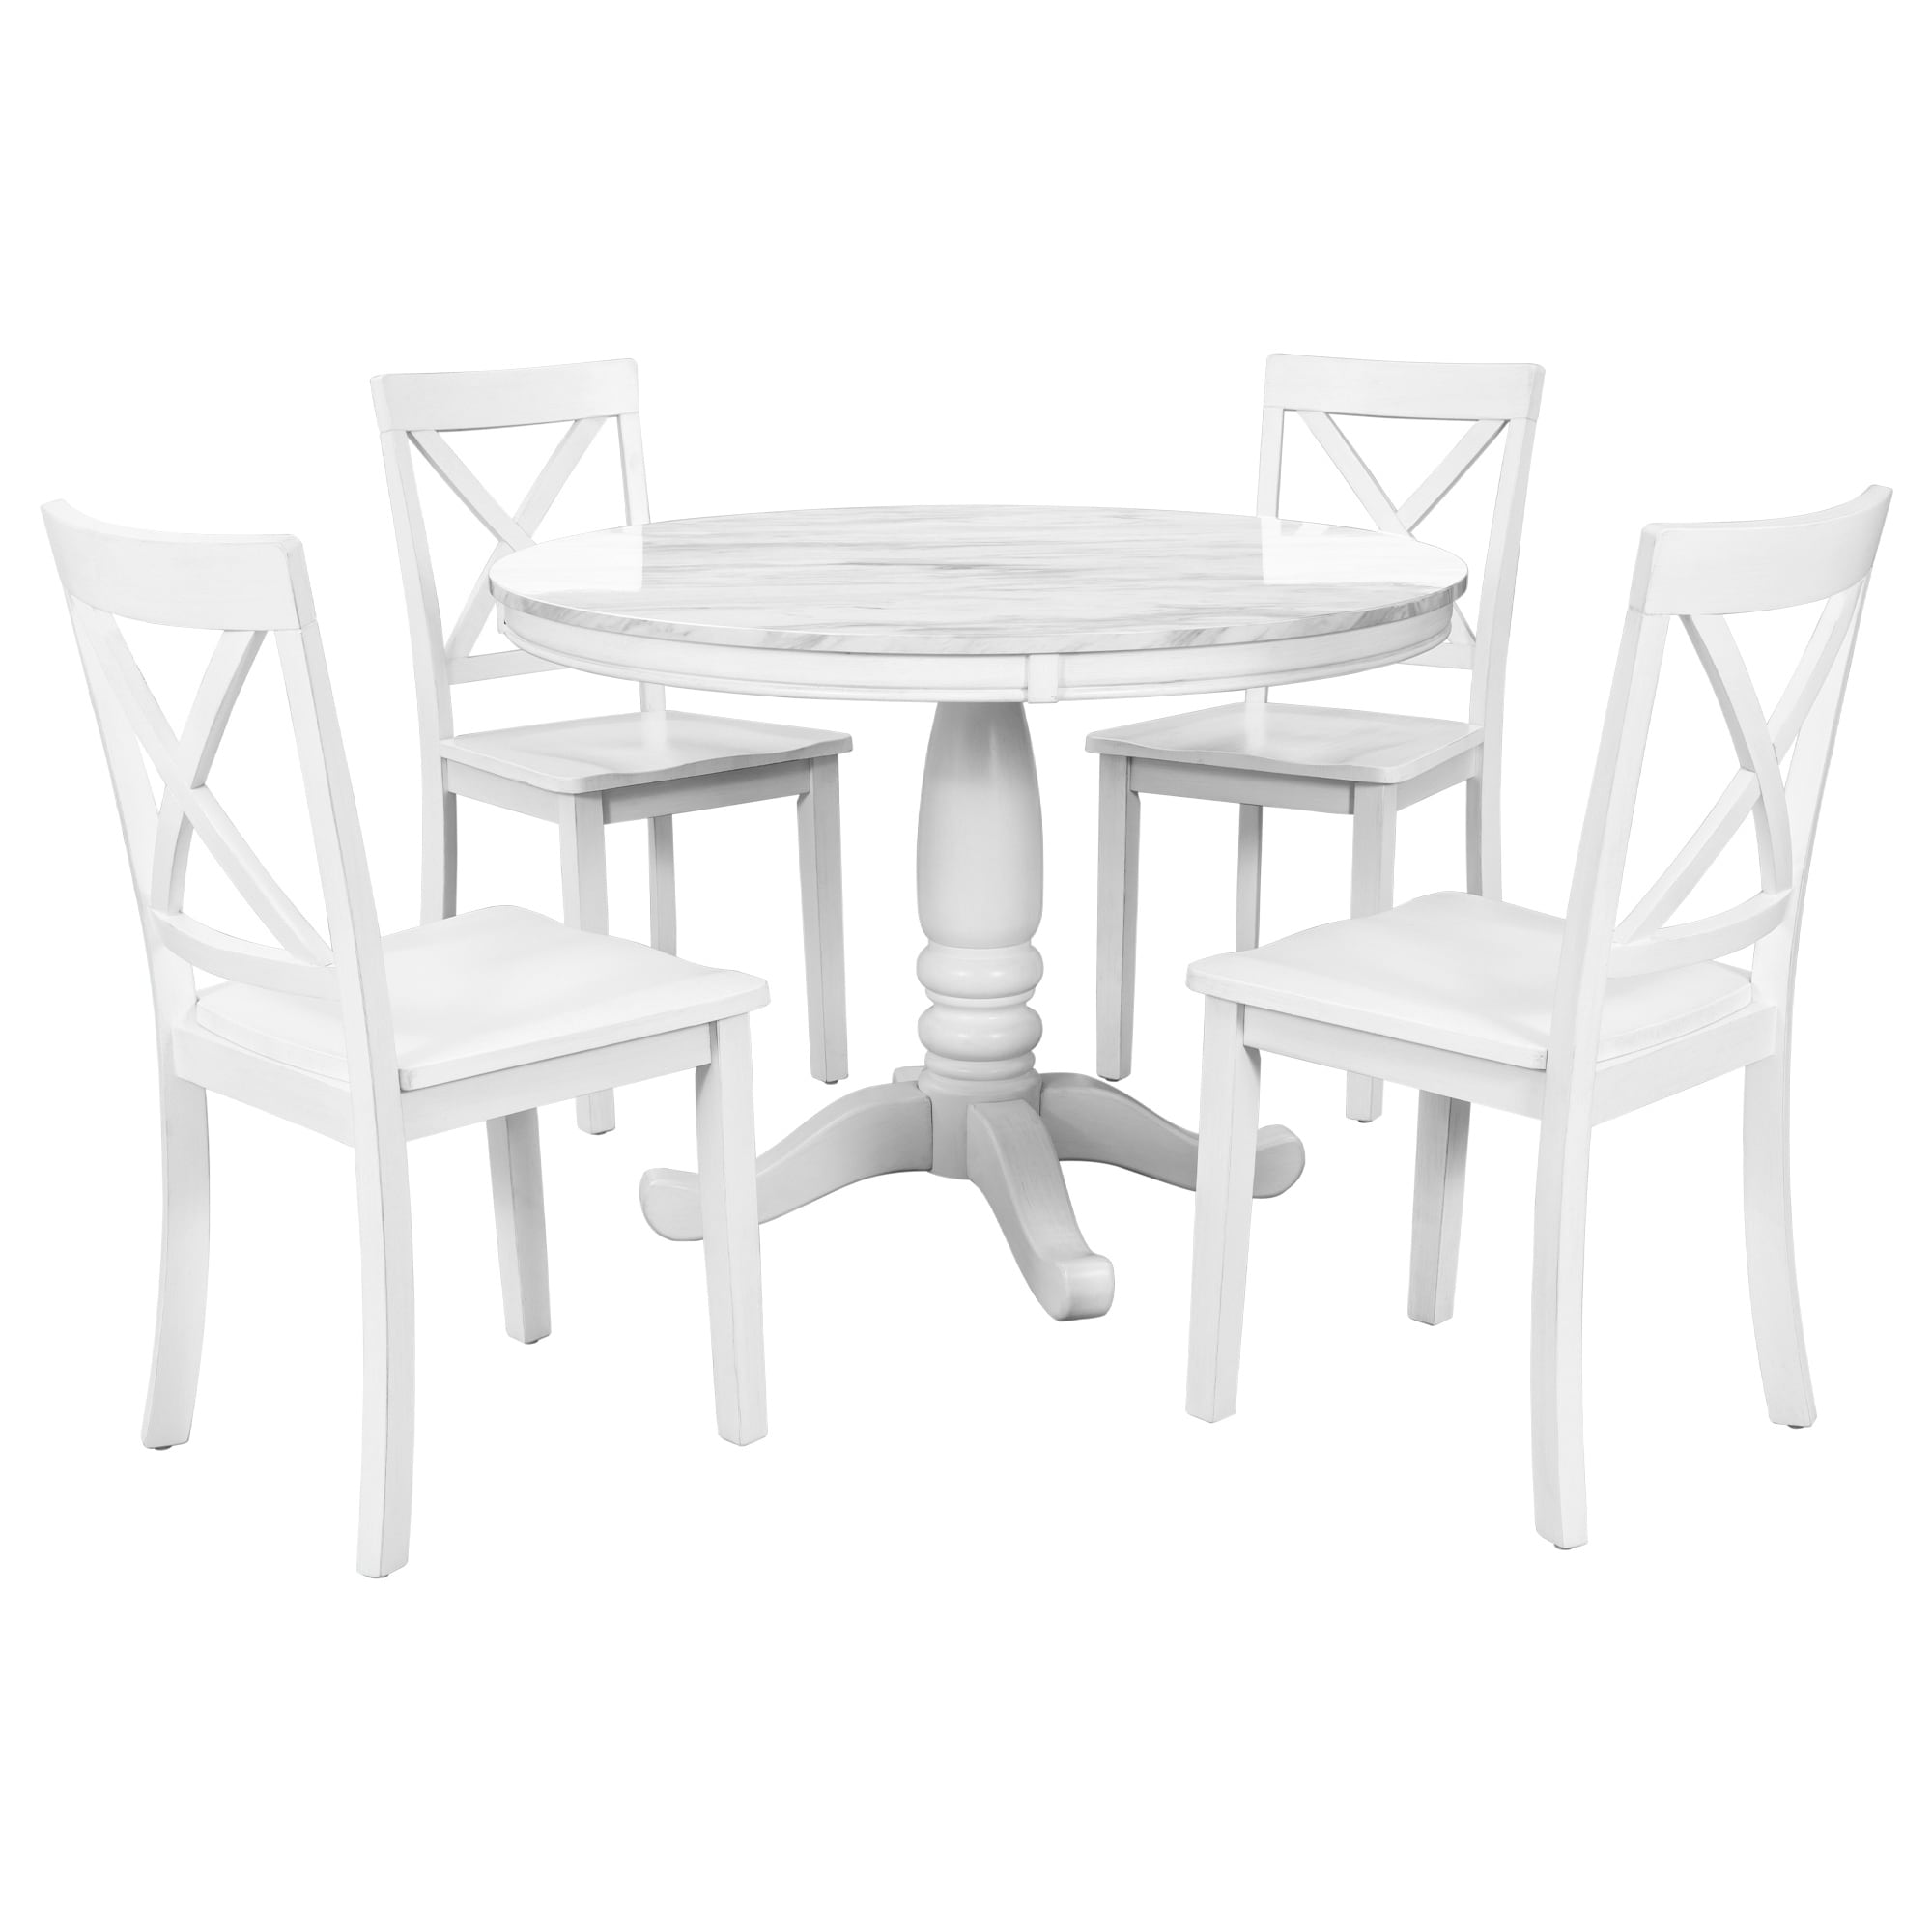 Modern 5-Piece Dining Table and Chairs Set with Solid Wood Table